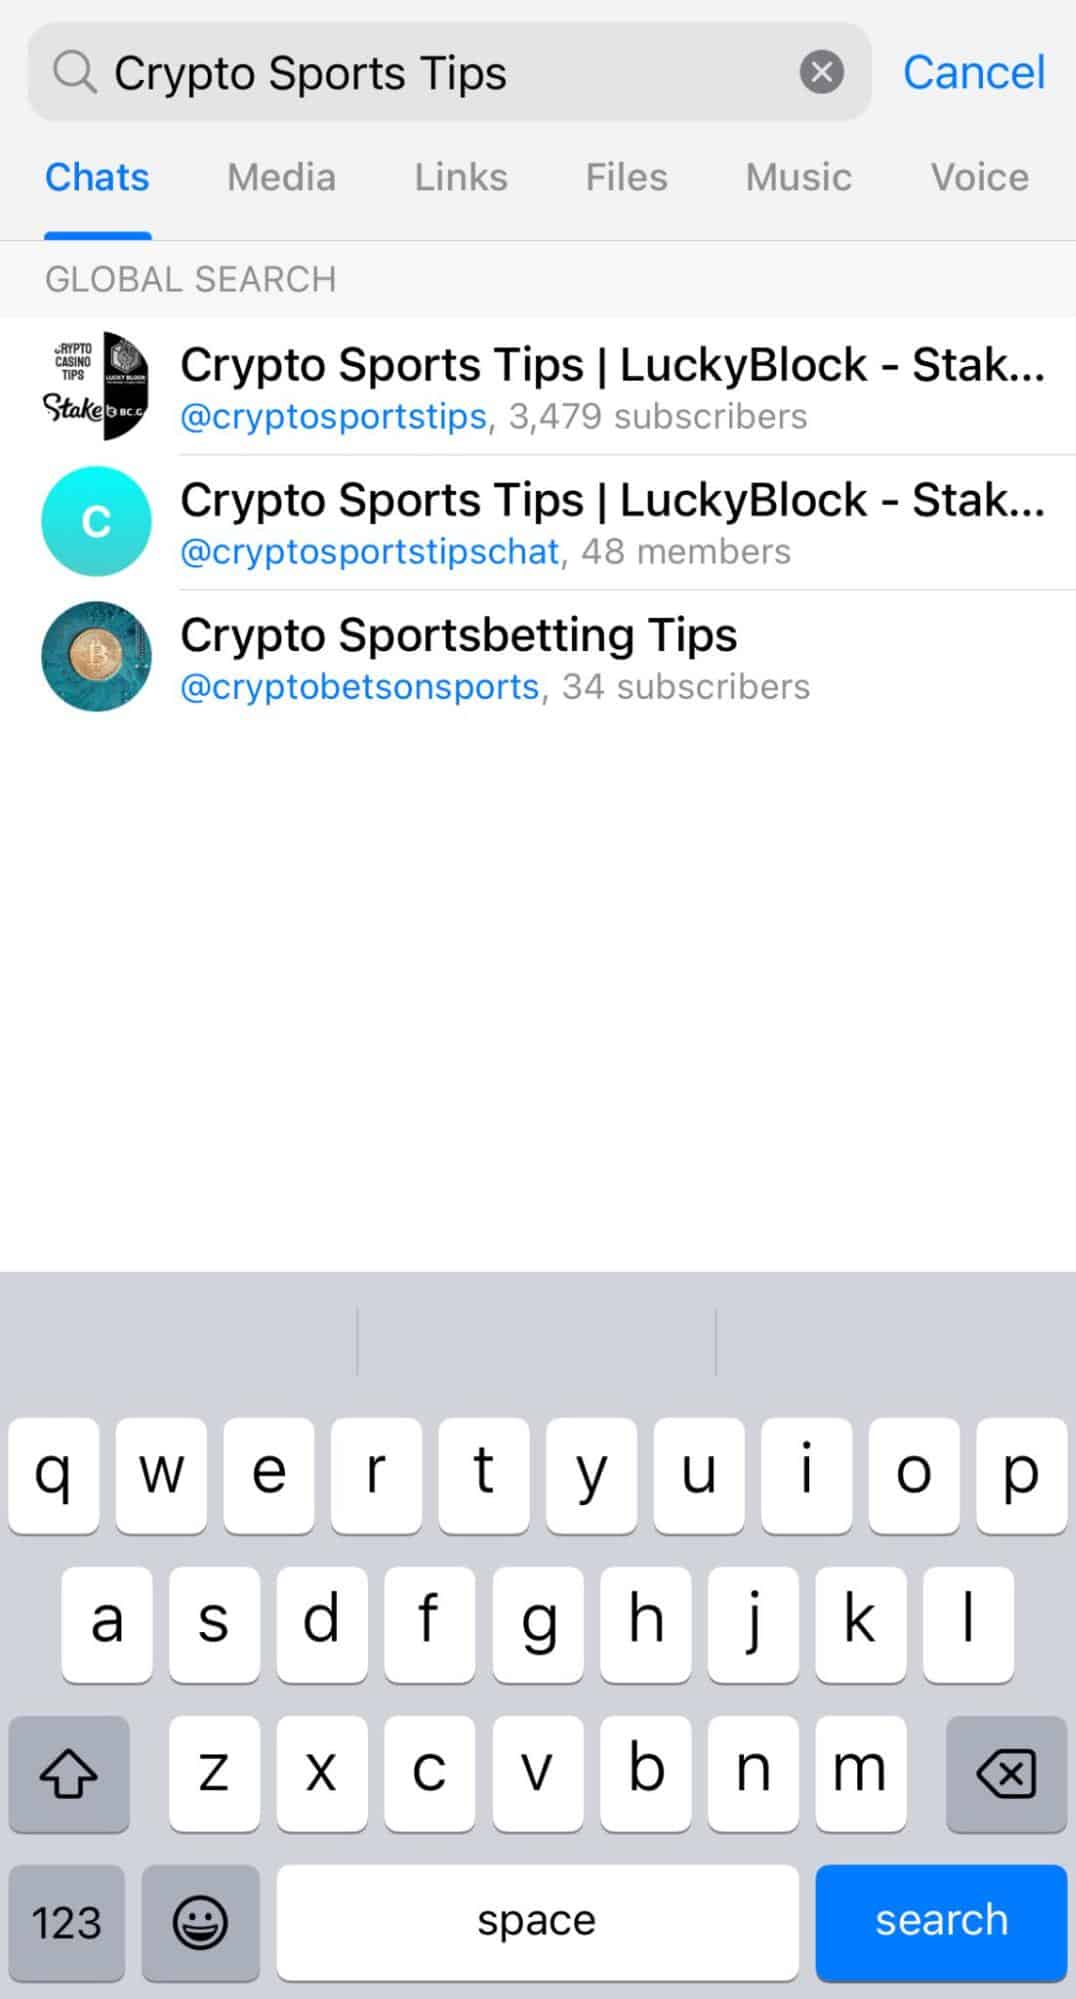 A screenshot of a search for "crypto sports tips" on Telegram